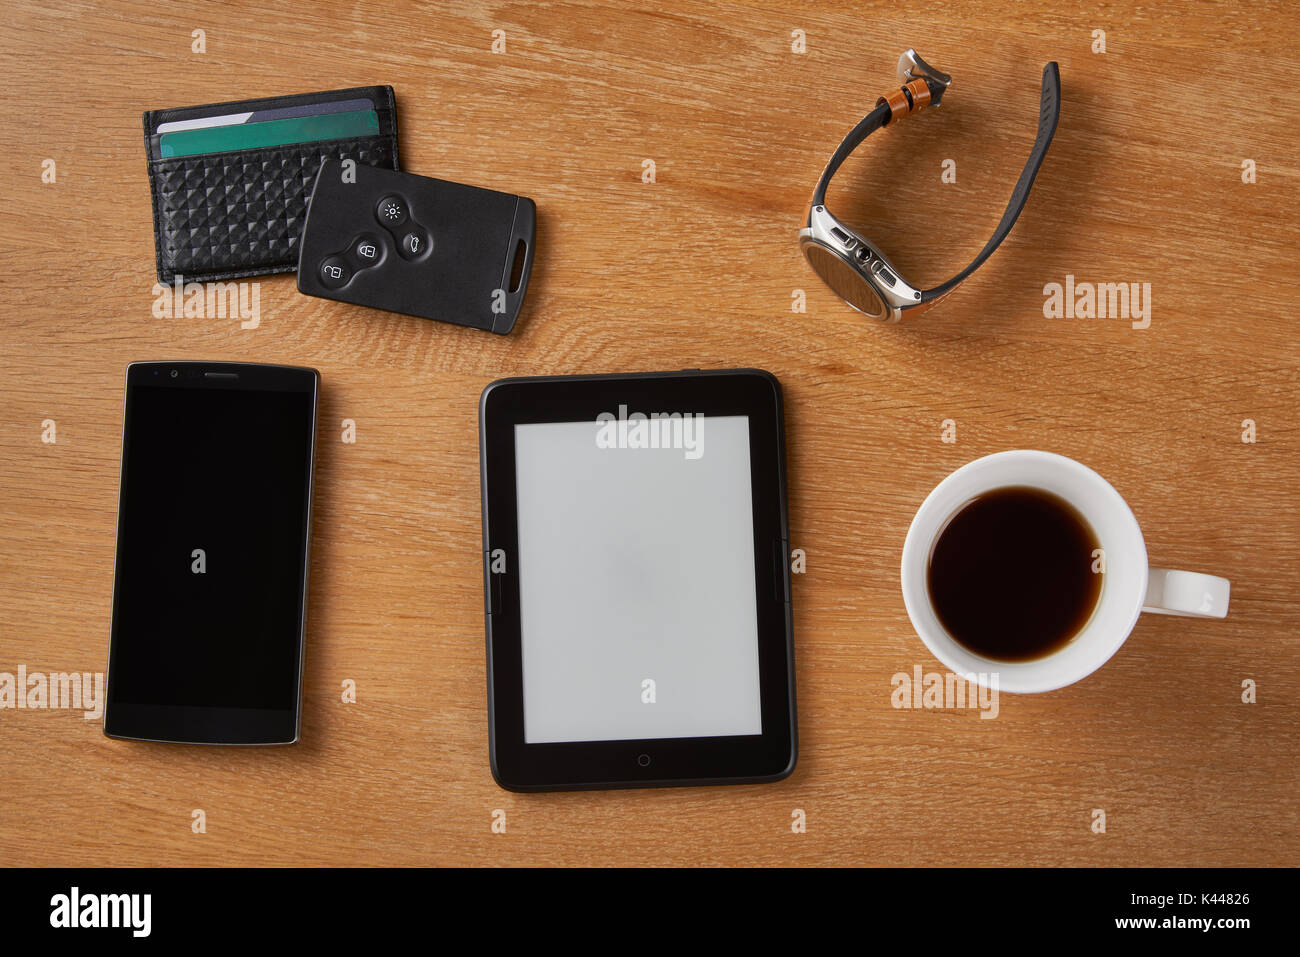 E-book device with Smart key, card wallet, smart watch, smart phone and a cup of coffee on a wooden table. Stock Photo